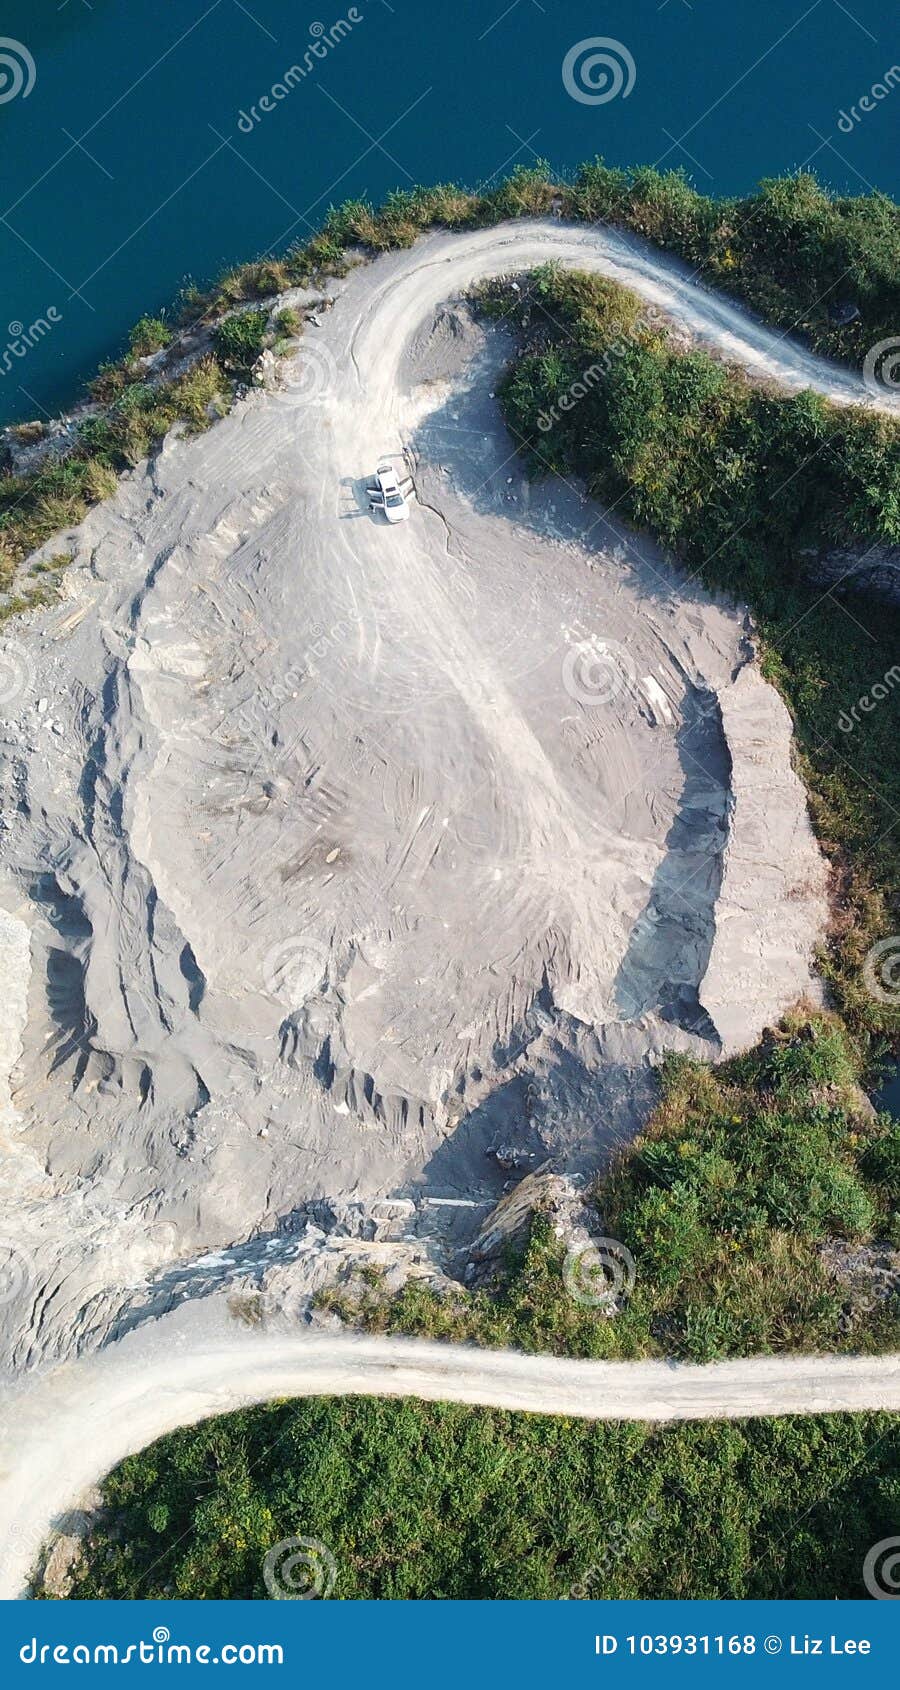 bird view of natural mine park, like a heart